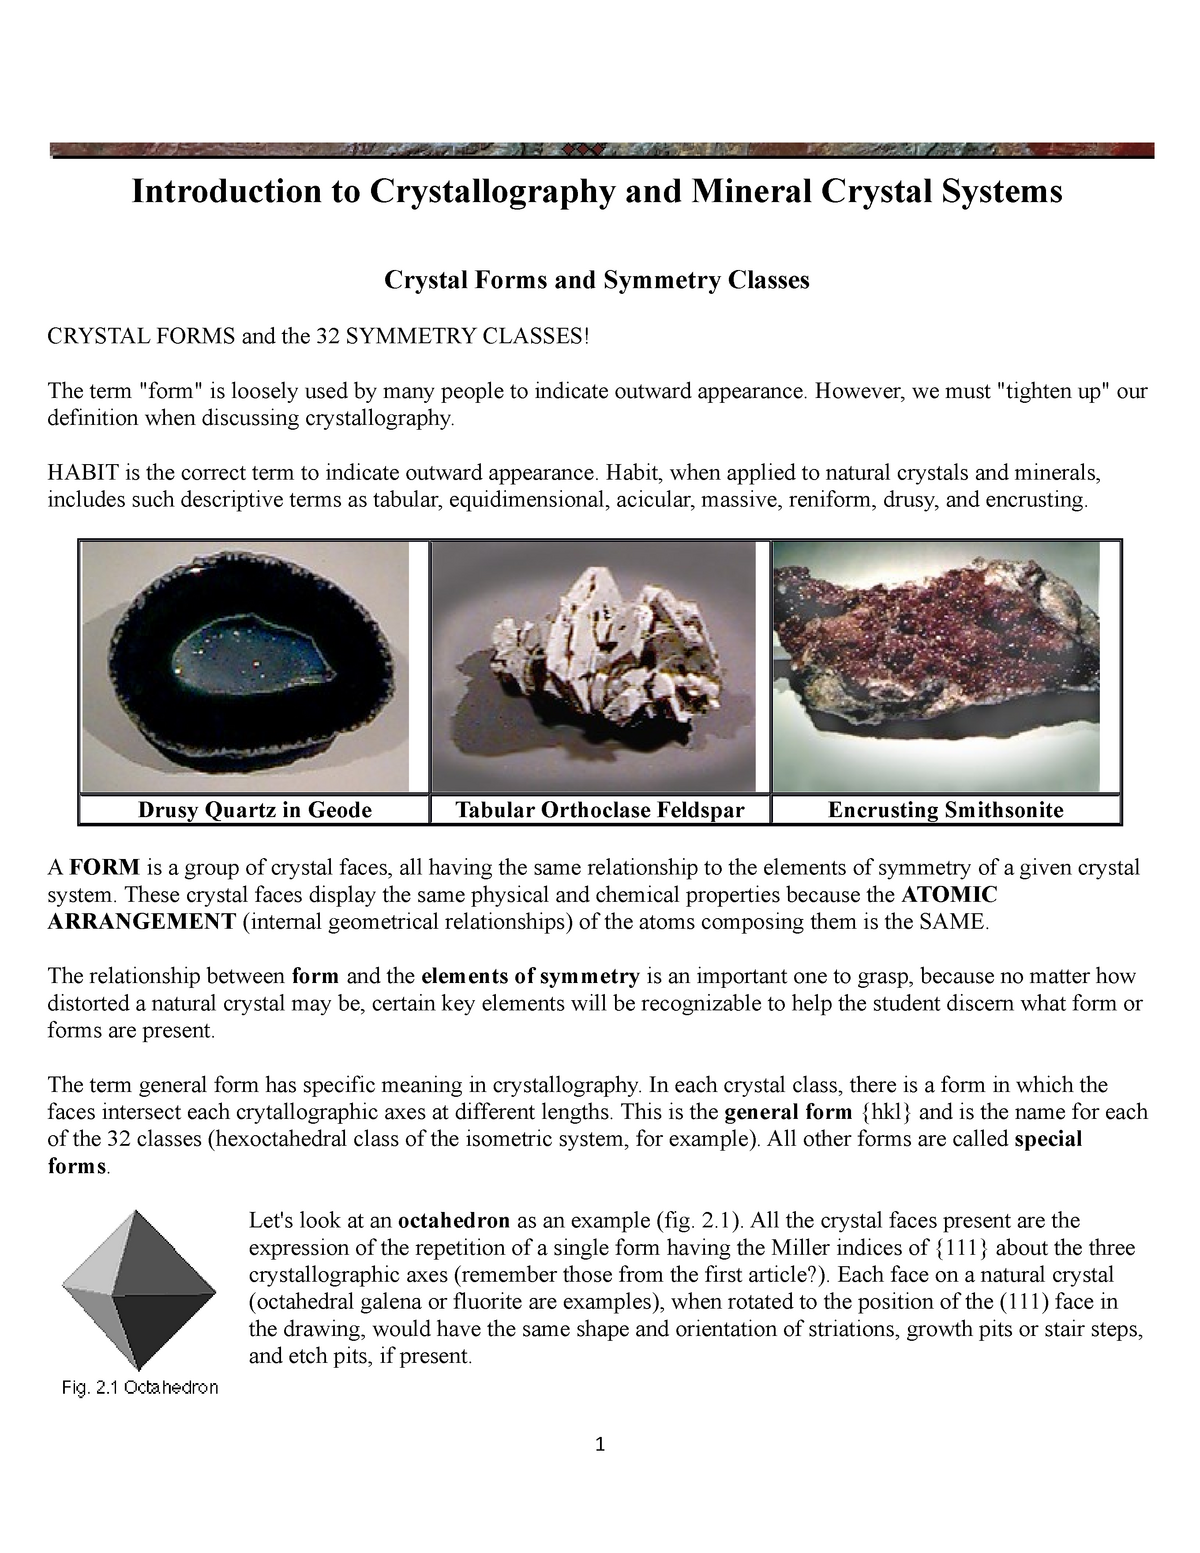 notes-1-co1-introduction-to-crystallography-and-mineral-crystal